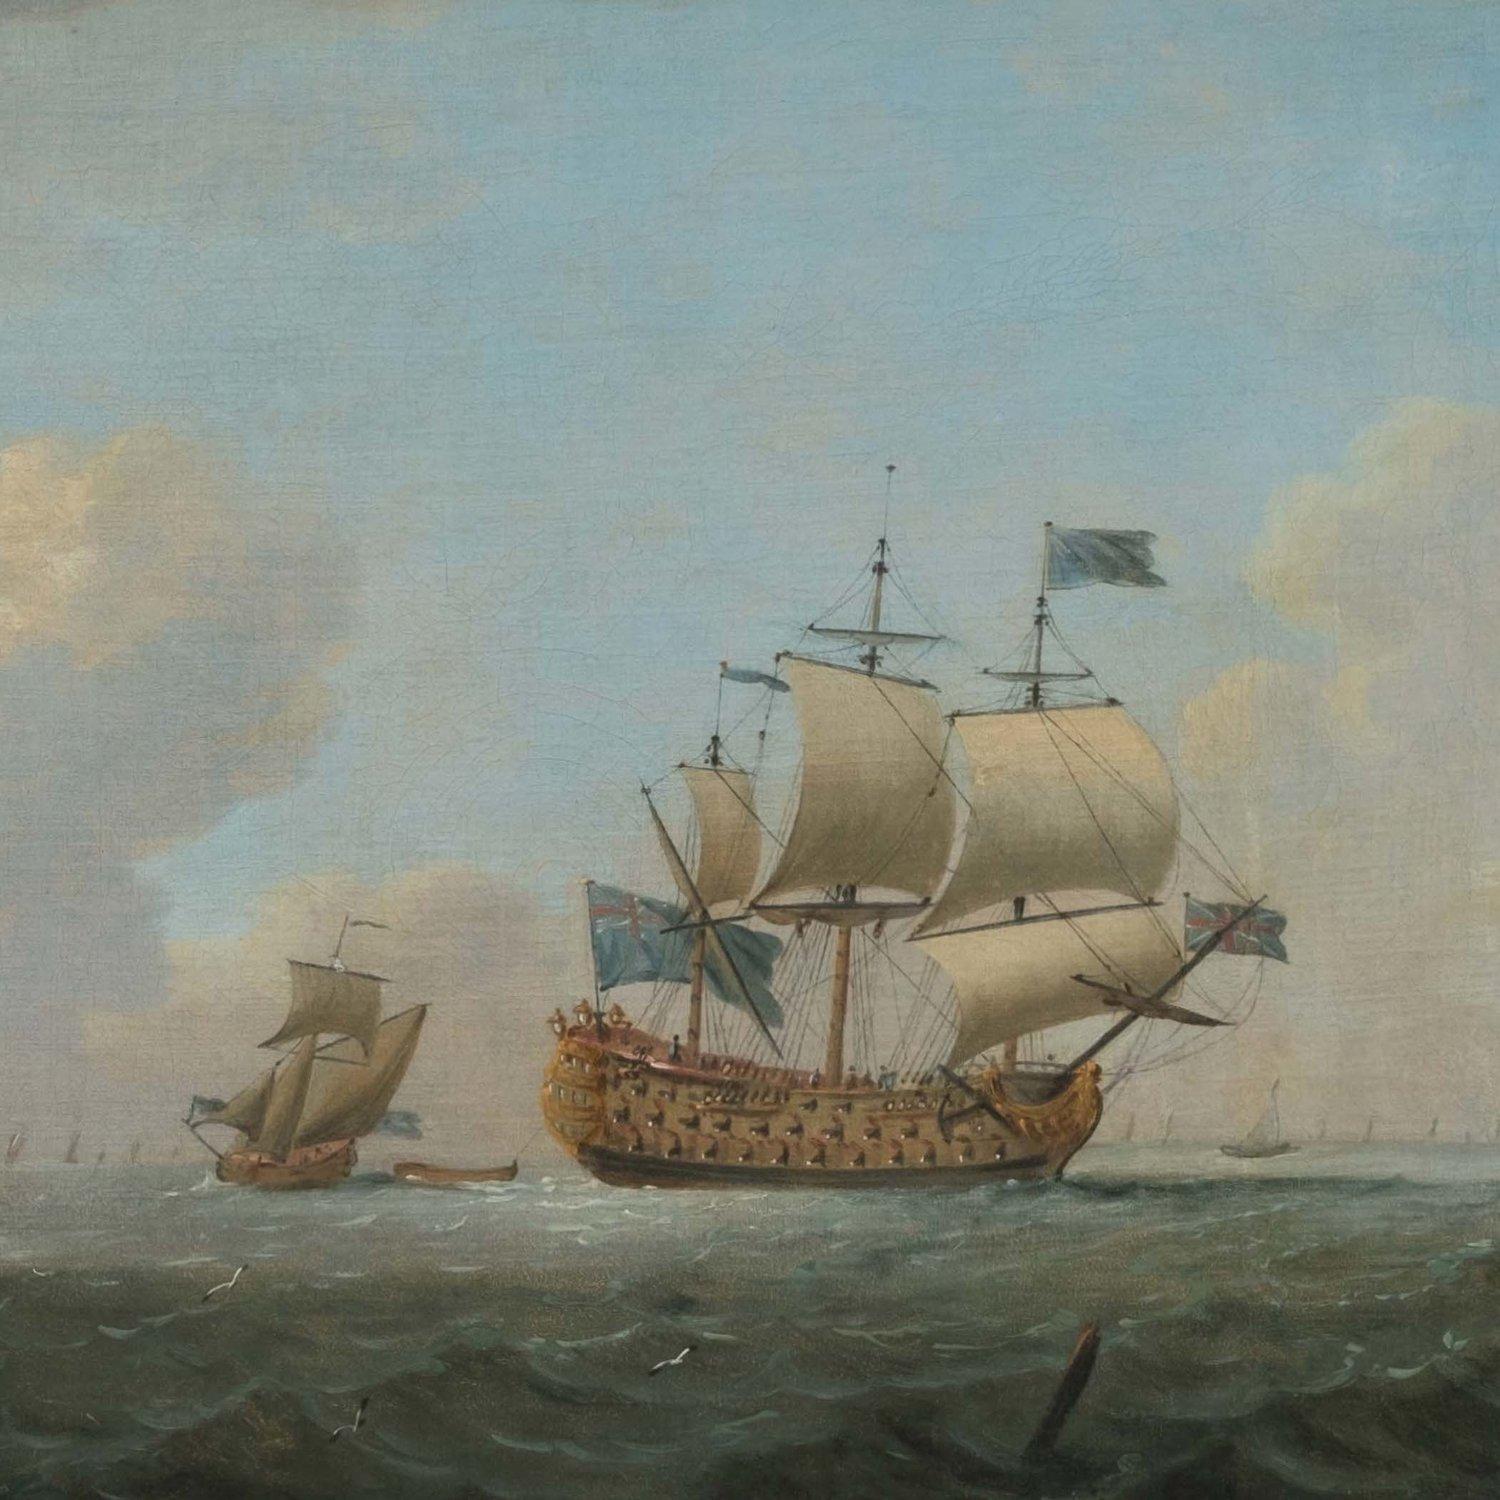 Peter MONAMY (1670-1749)

Shipping off St. Helier, Jersey

oil on canvas

26 x 42 inches, inc. frame carved and gilded

Provenance: Christie's King Street, 1988, as 